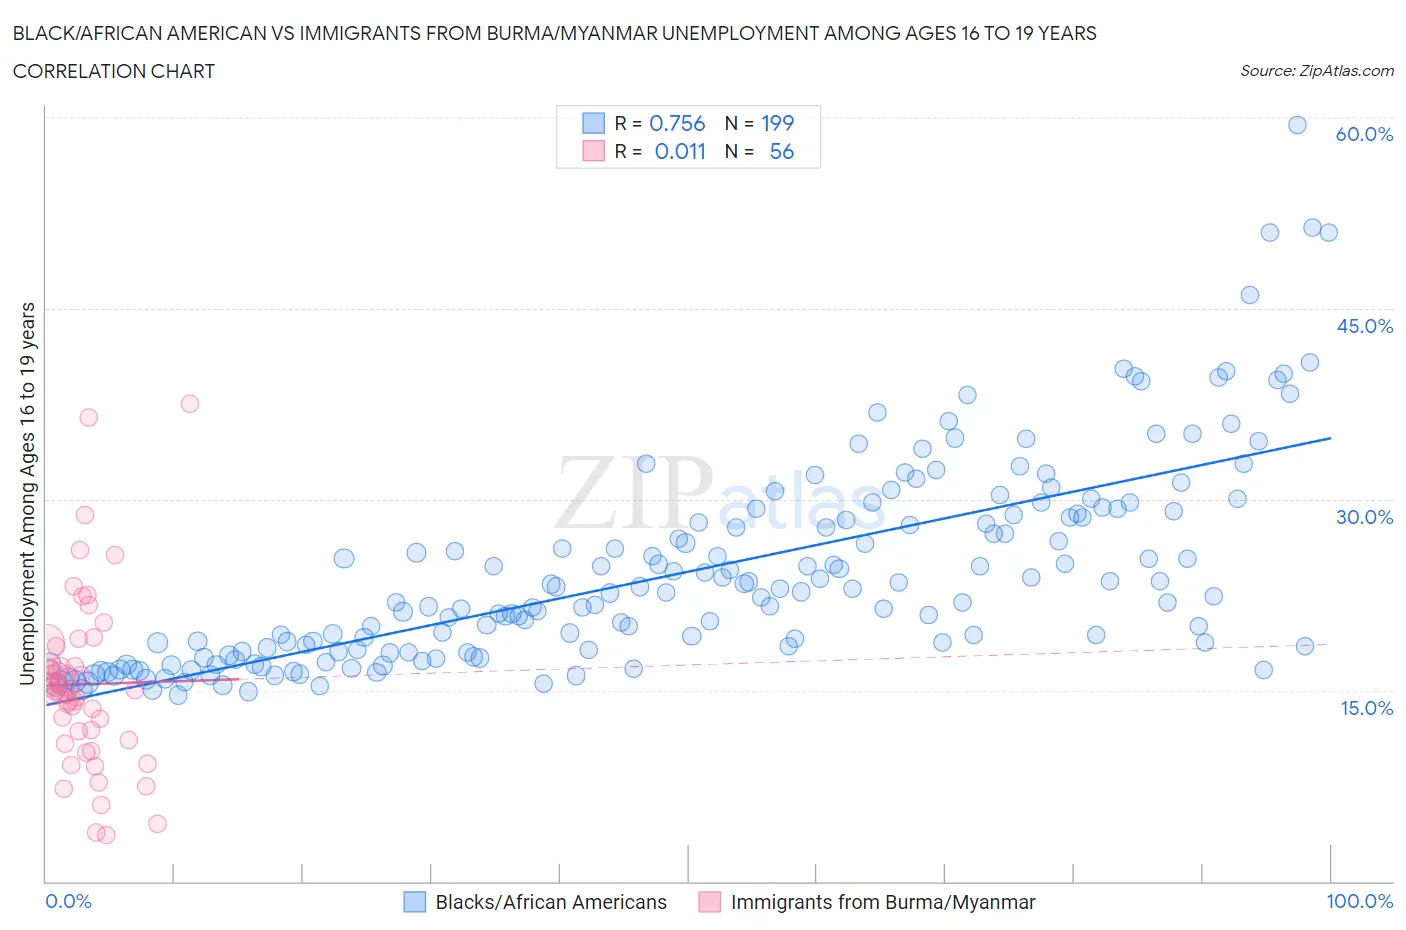 Black/African American vs Immigrants from Burma/Myanmar Unemployment Among Ages 16 to 19 years